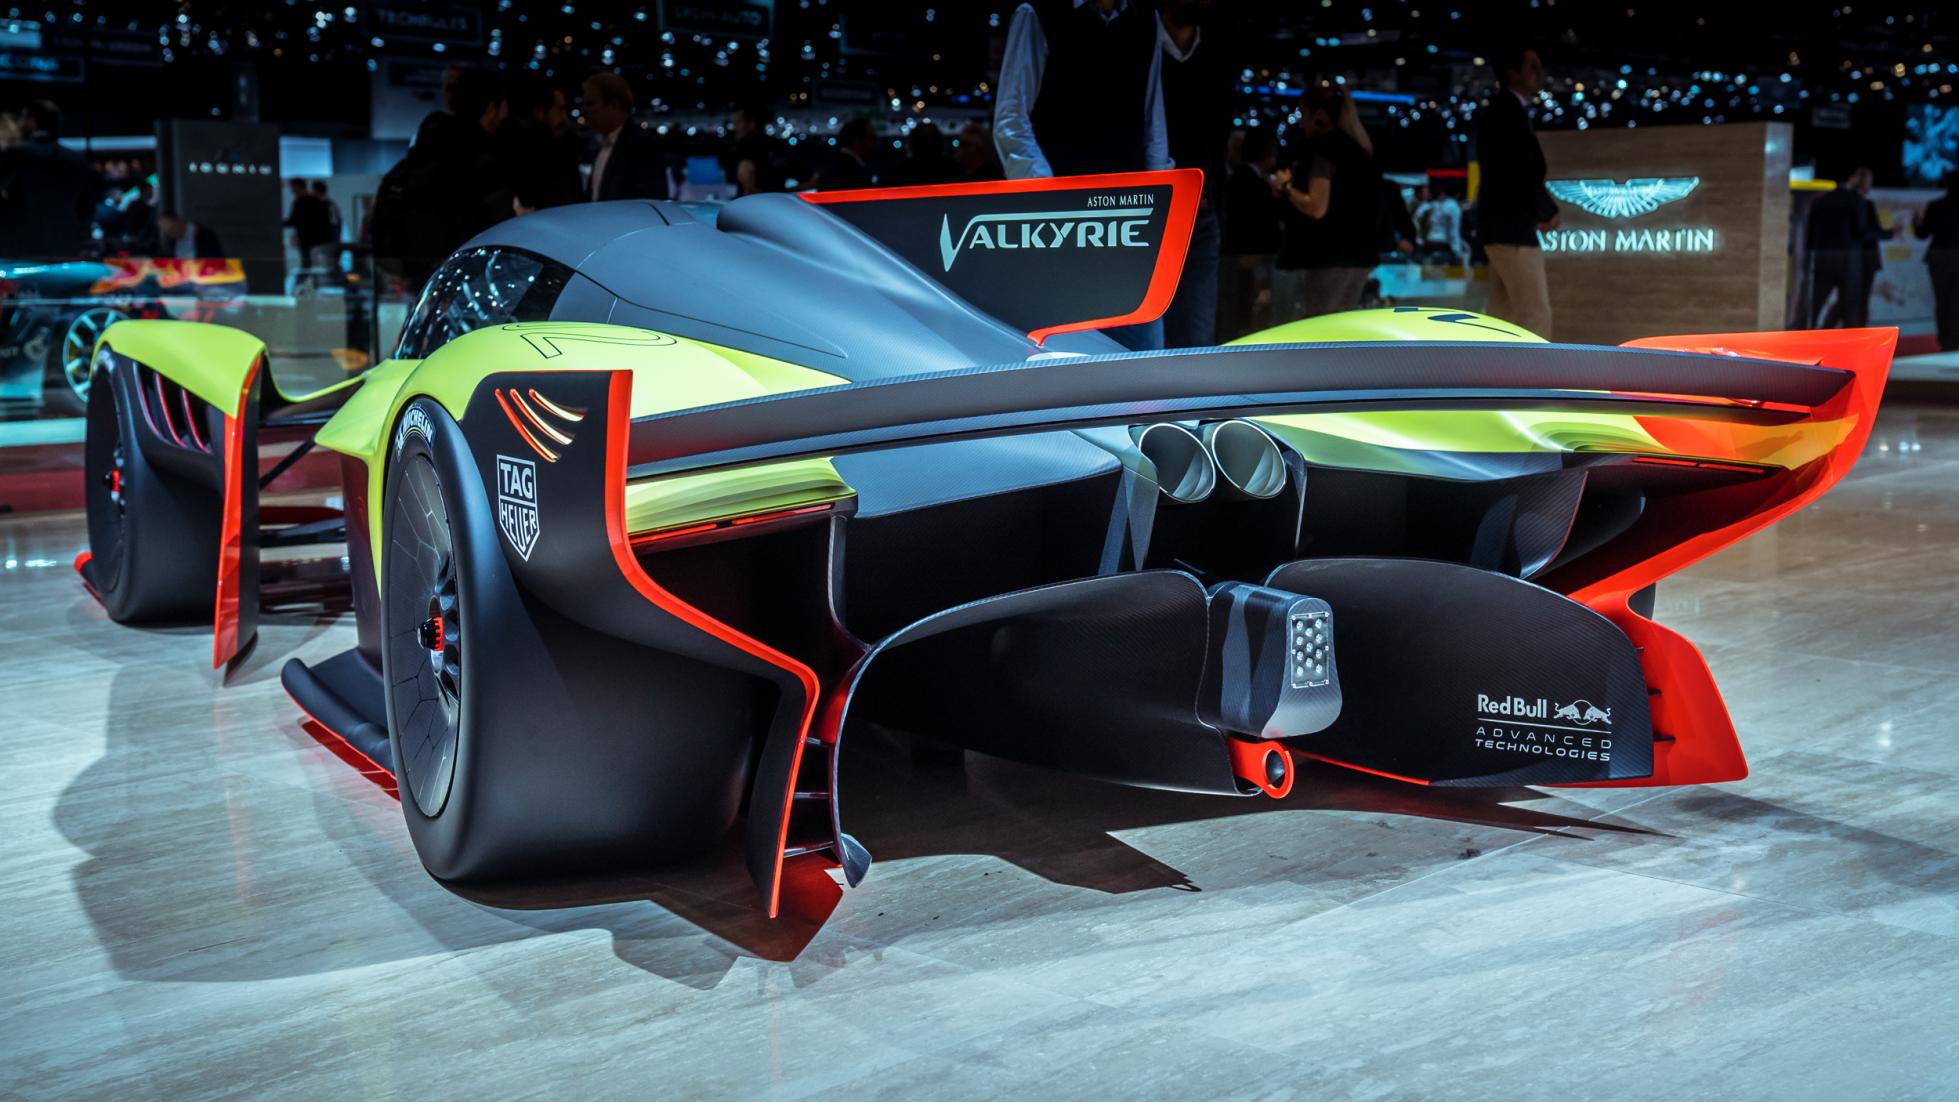 Topgear Be Afraid This Is The 1100bhp Aston Martin Valkyrie Amr Pro